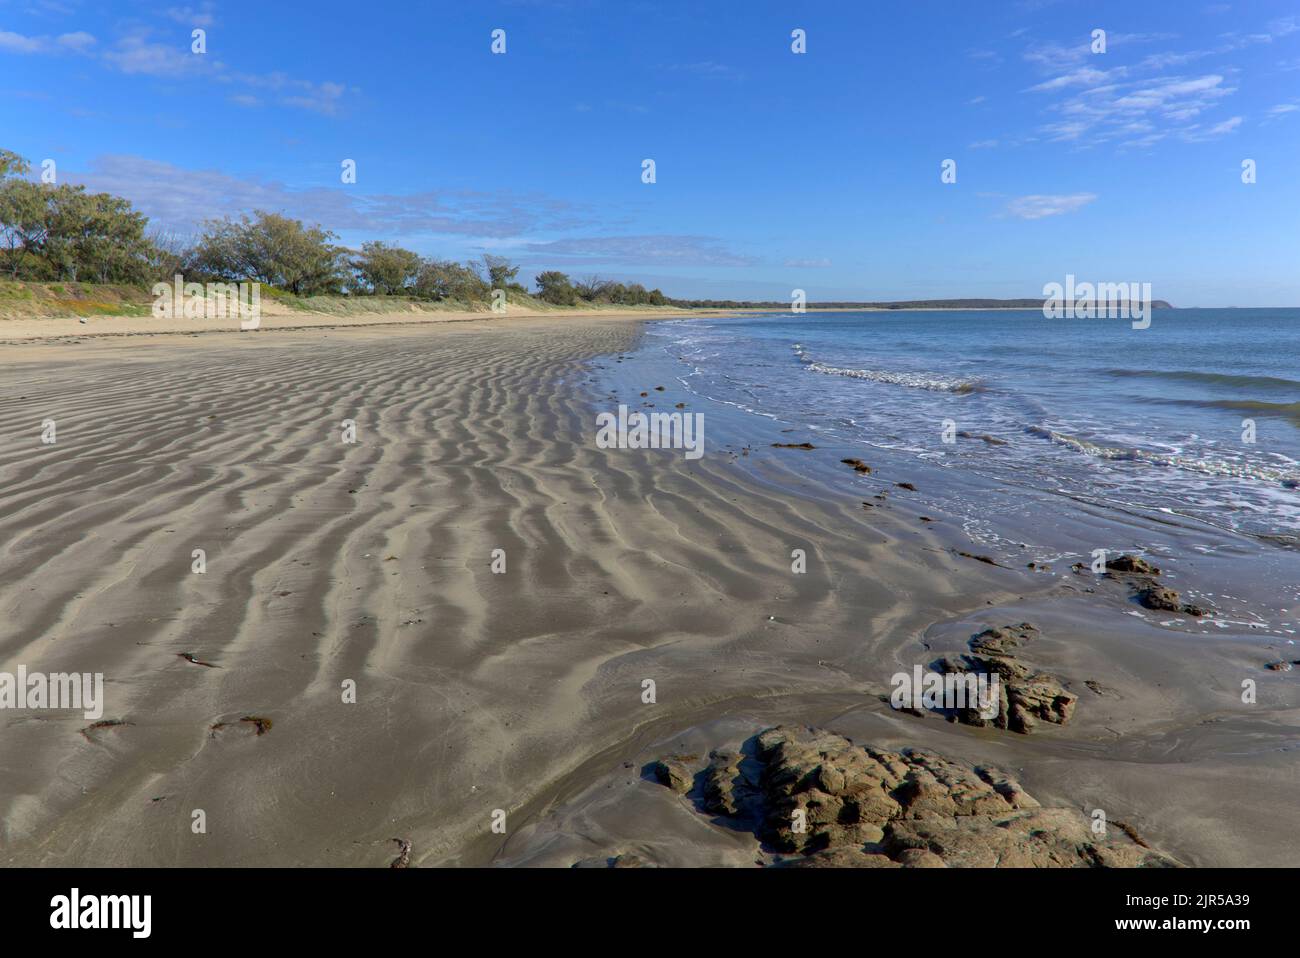 The beach on the eastern shores Southend Curtis Island Queensland Australia Stock Photo